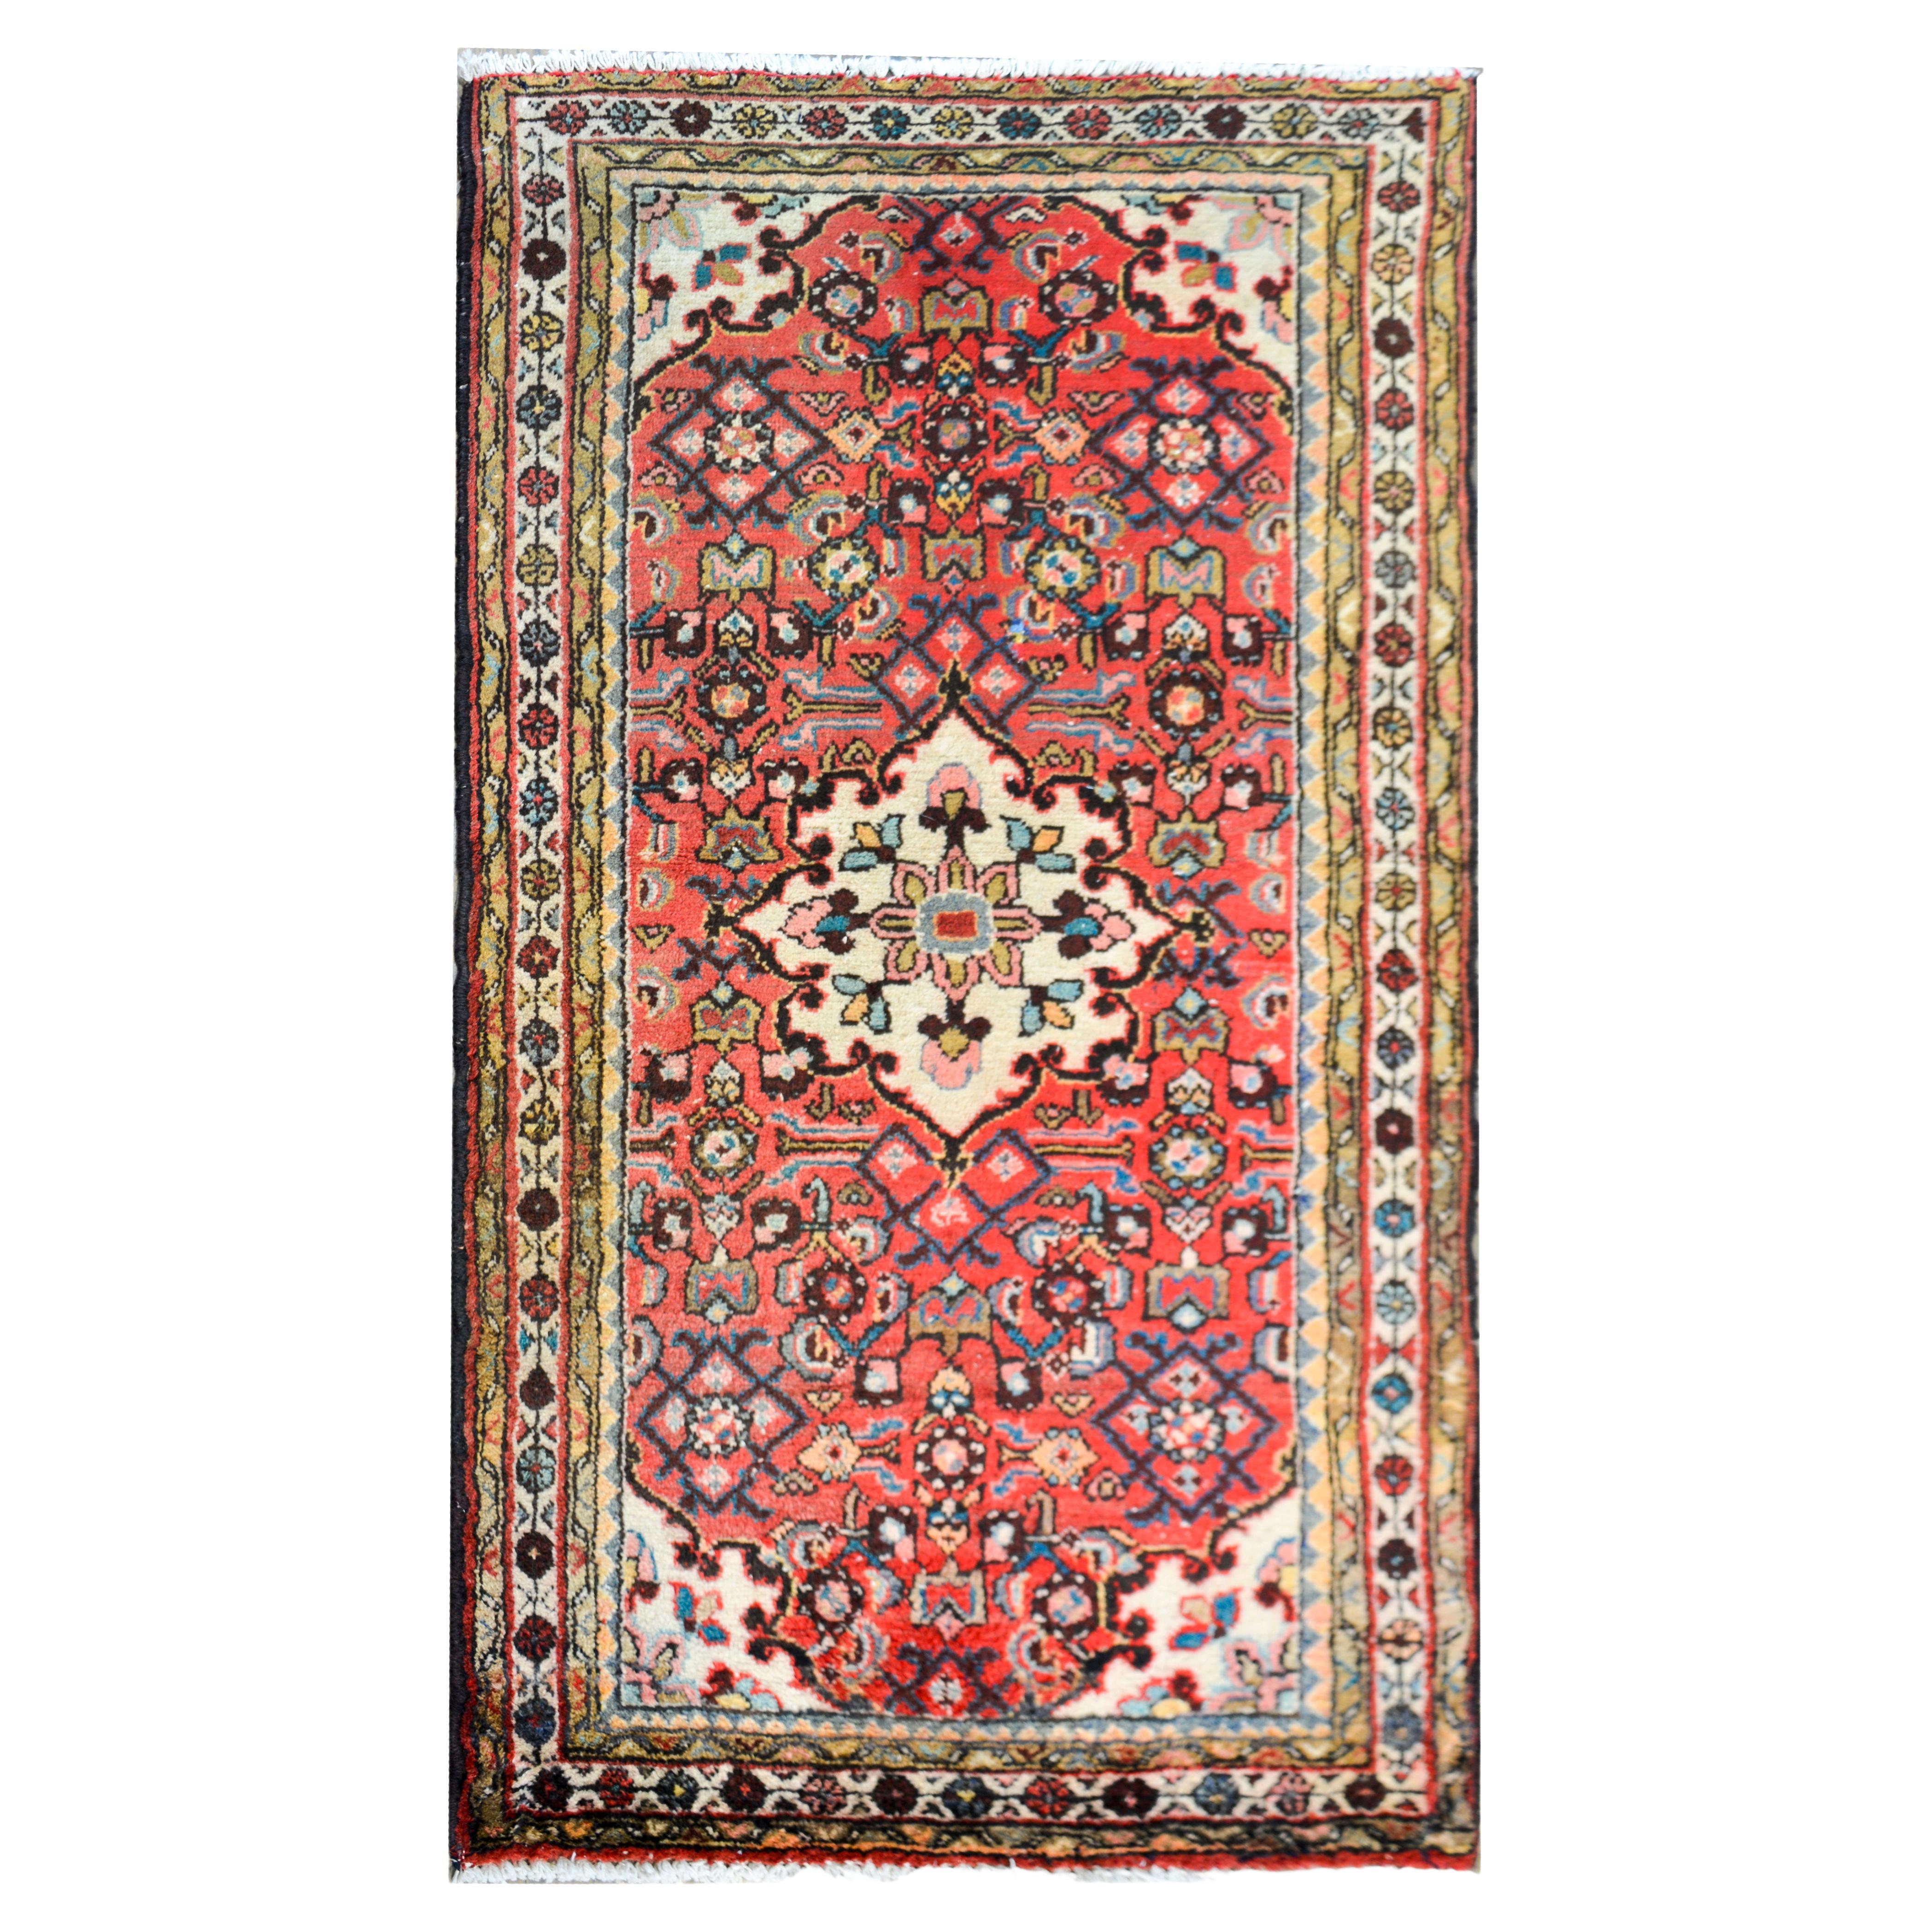 What is a Hamadan rug?